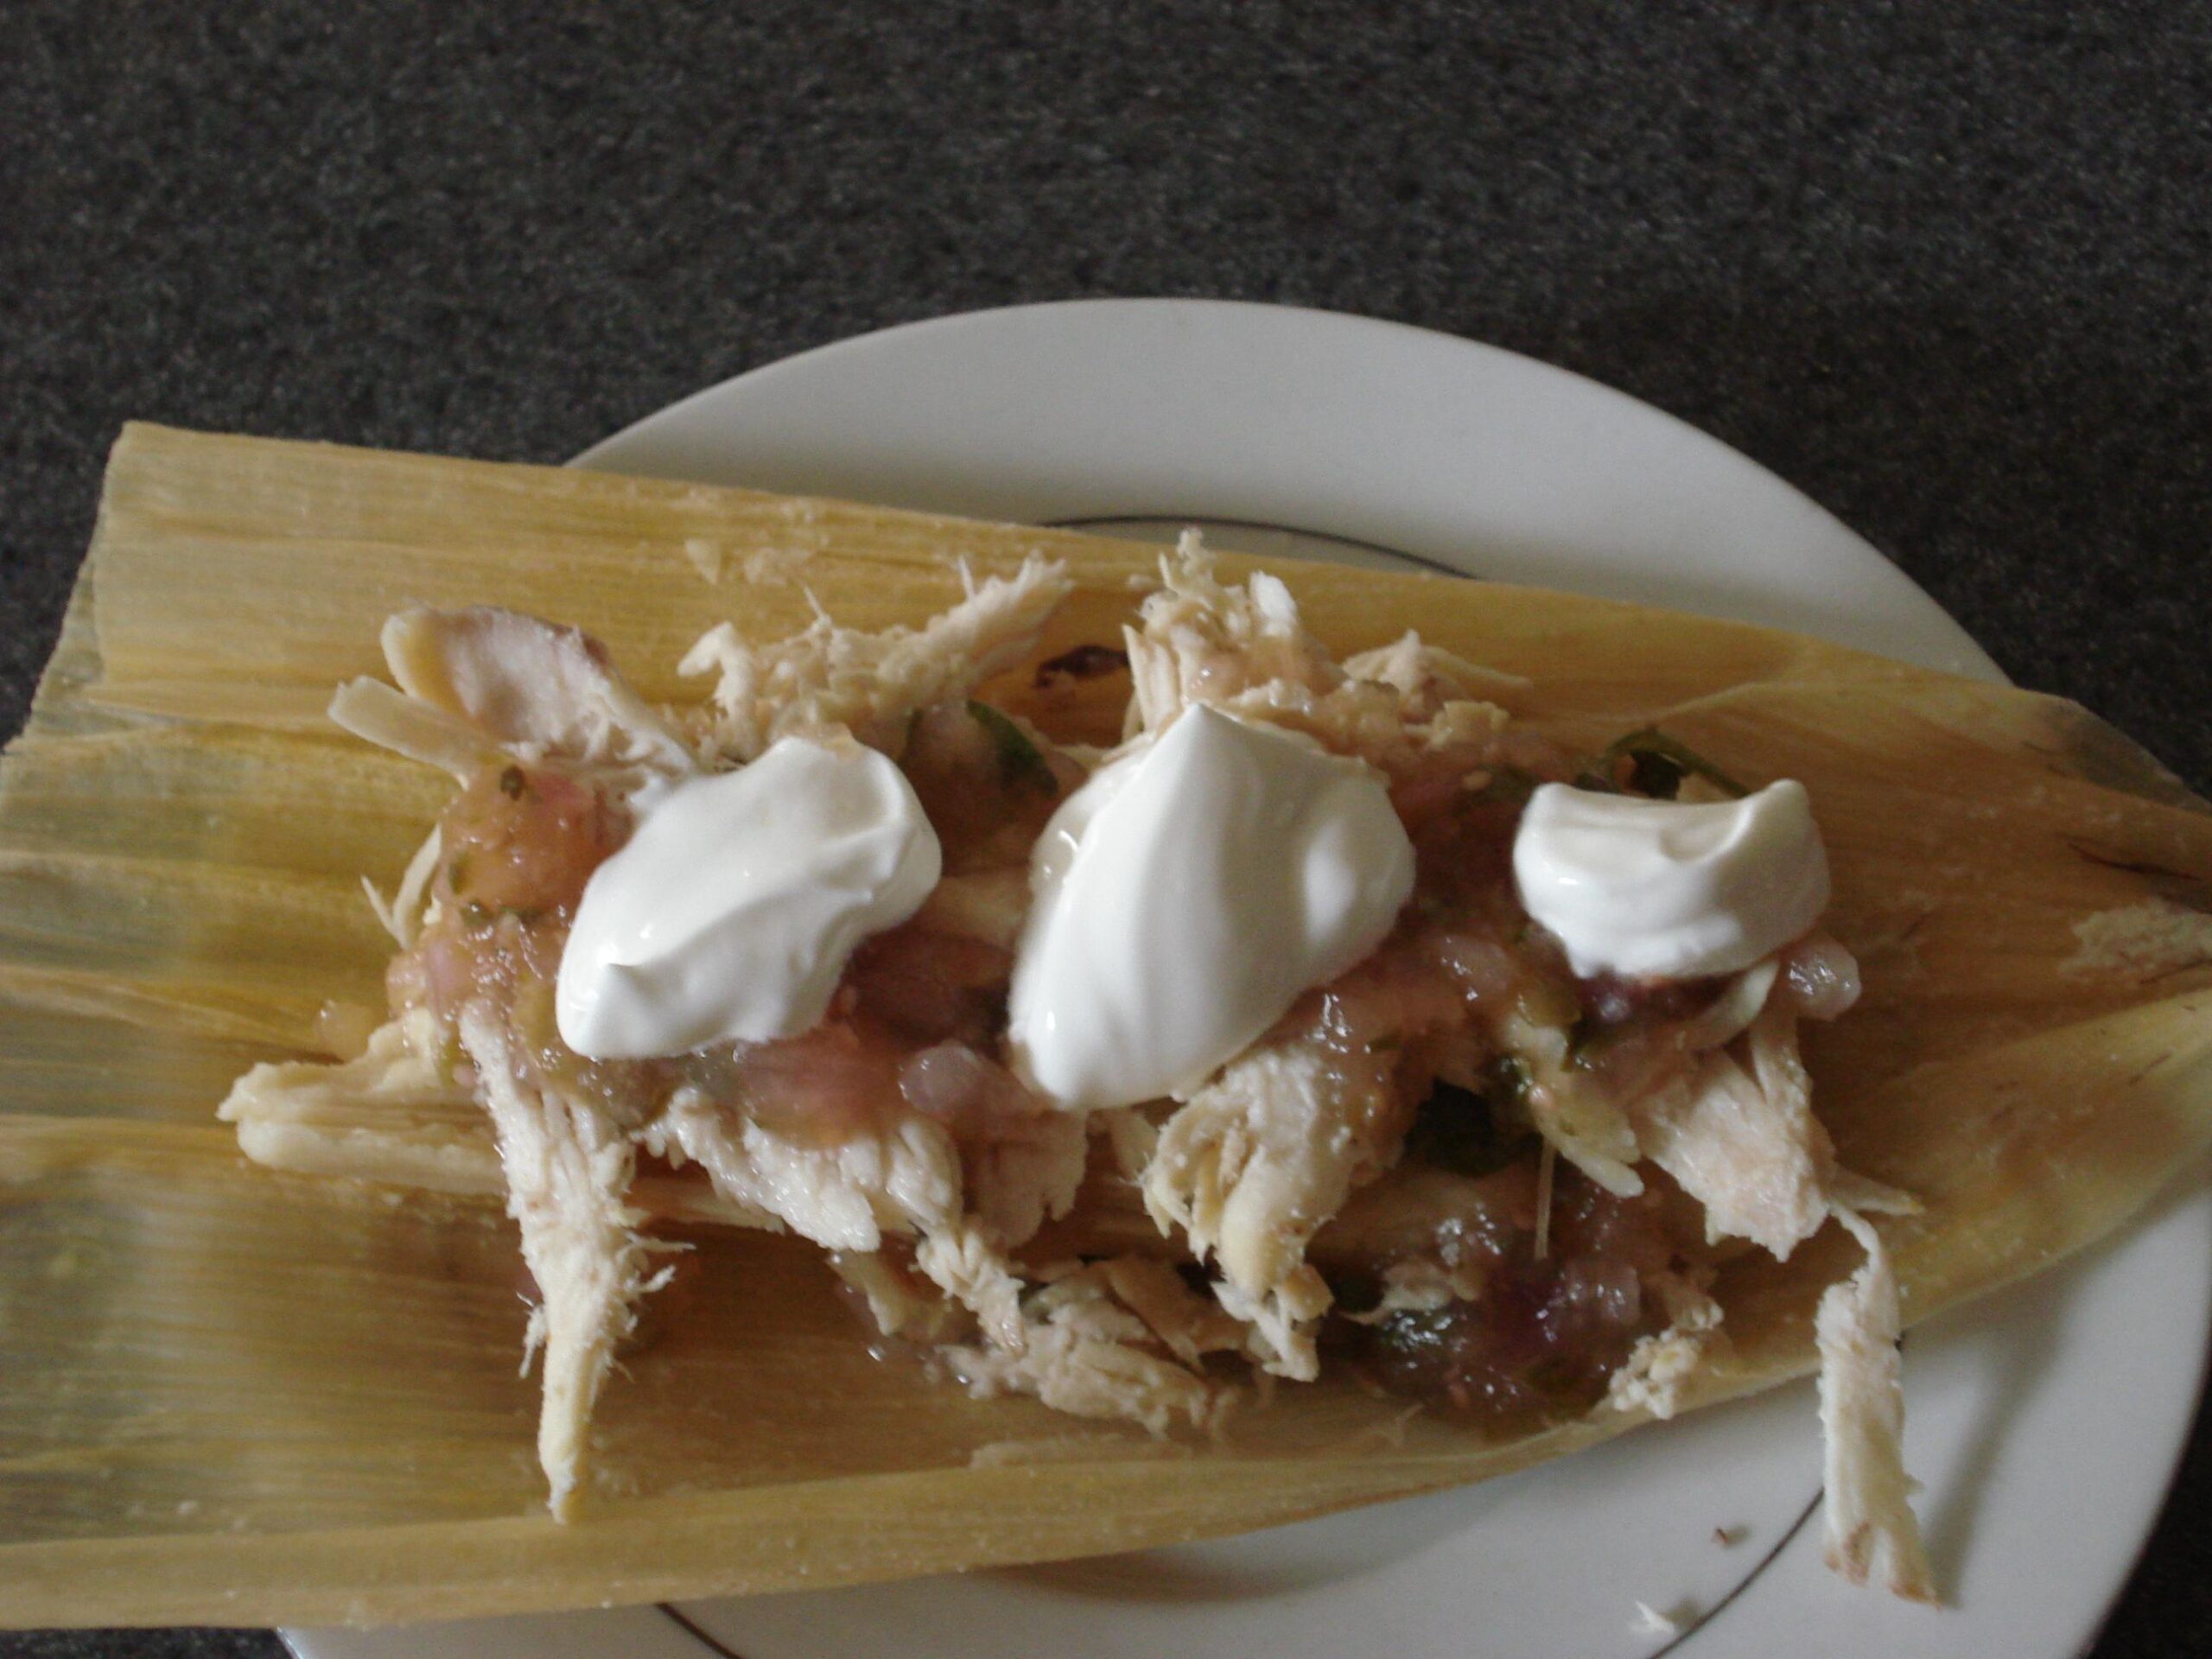  Tamales so good, you won't even miss the meat!